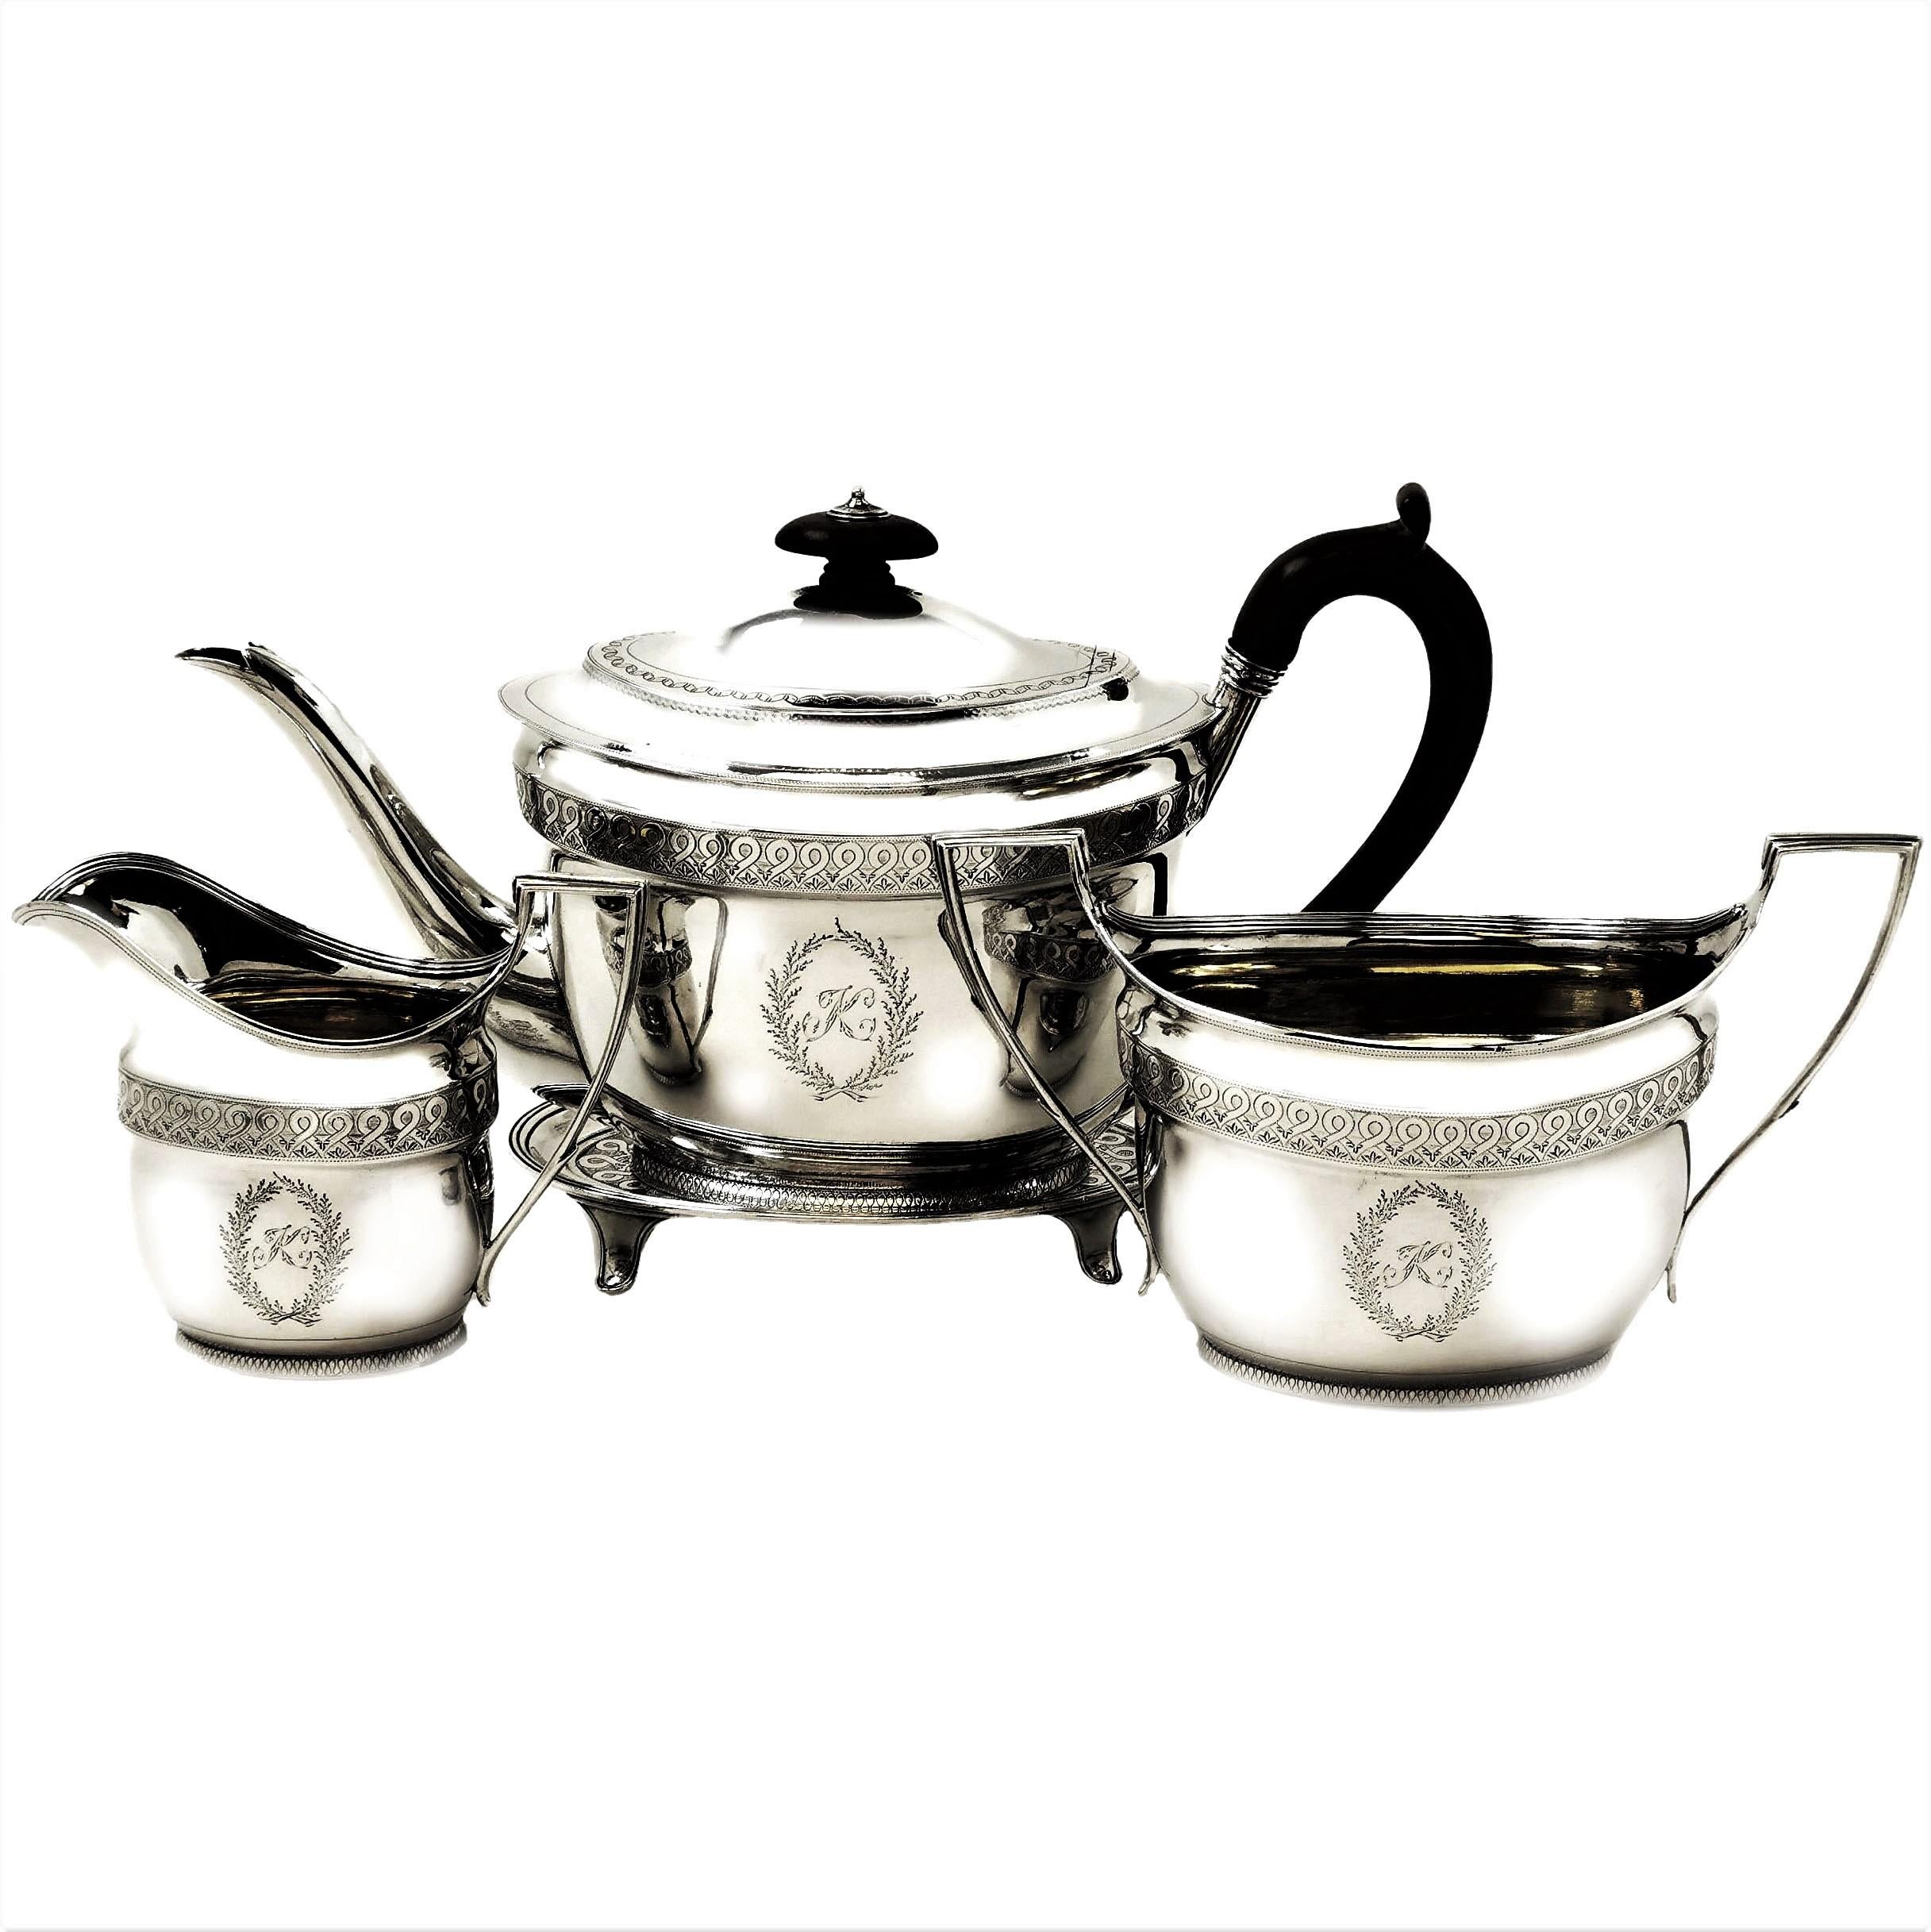 A lovely Antique George III solid Silver four piece Tea Set comprising of a Teapot on Tray, a Cream / Milk Jug and a Sugar Bowl. Each piece is embellished with a delicate engraved band and an engraved crest on one side and a monogram on the other.